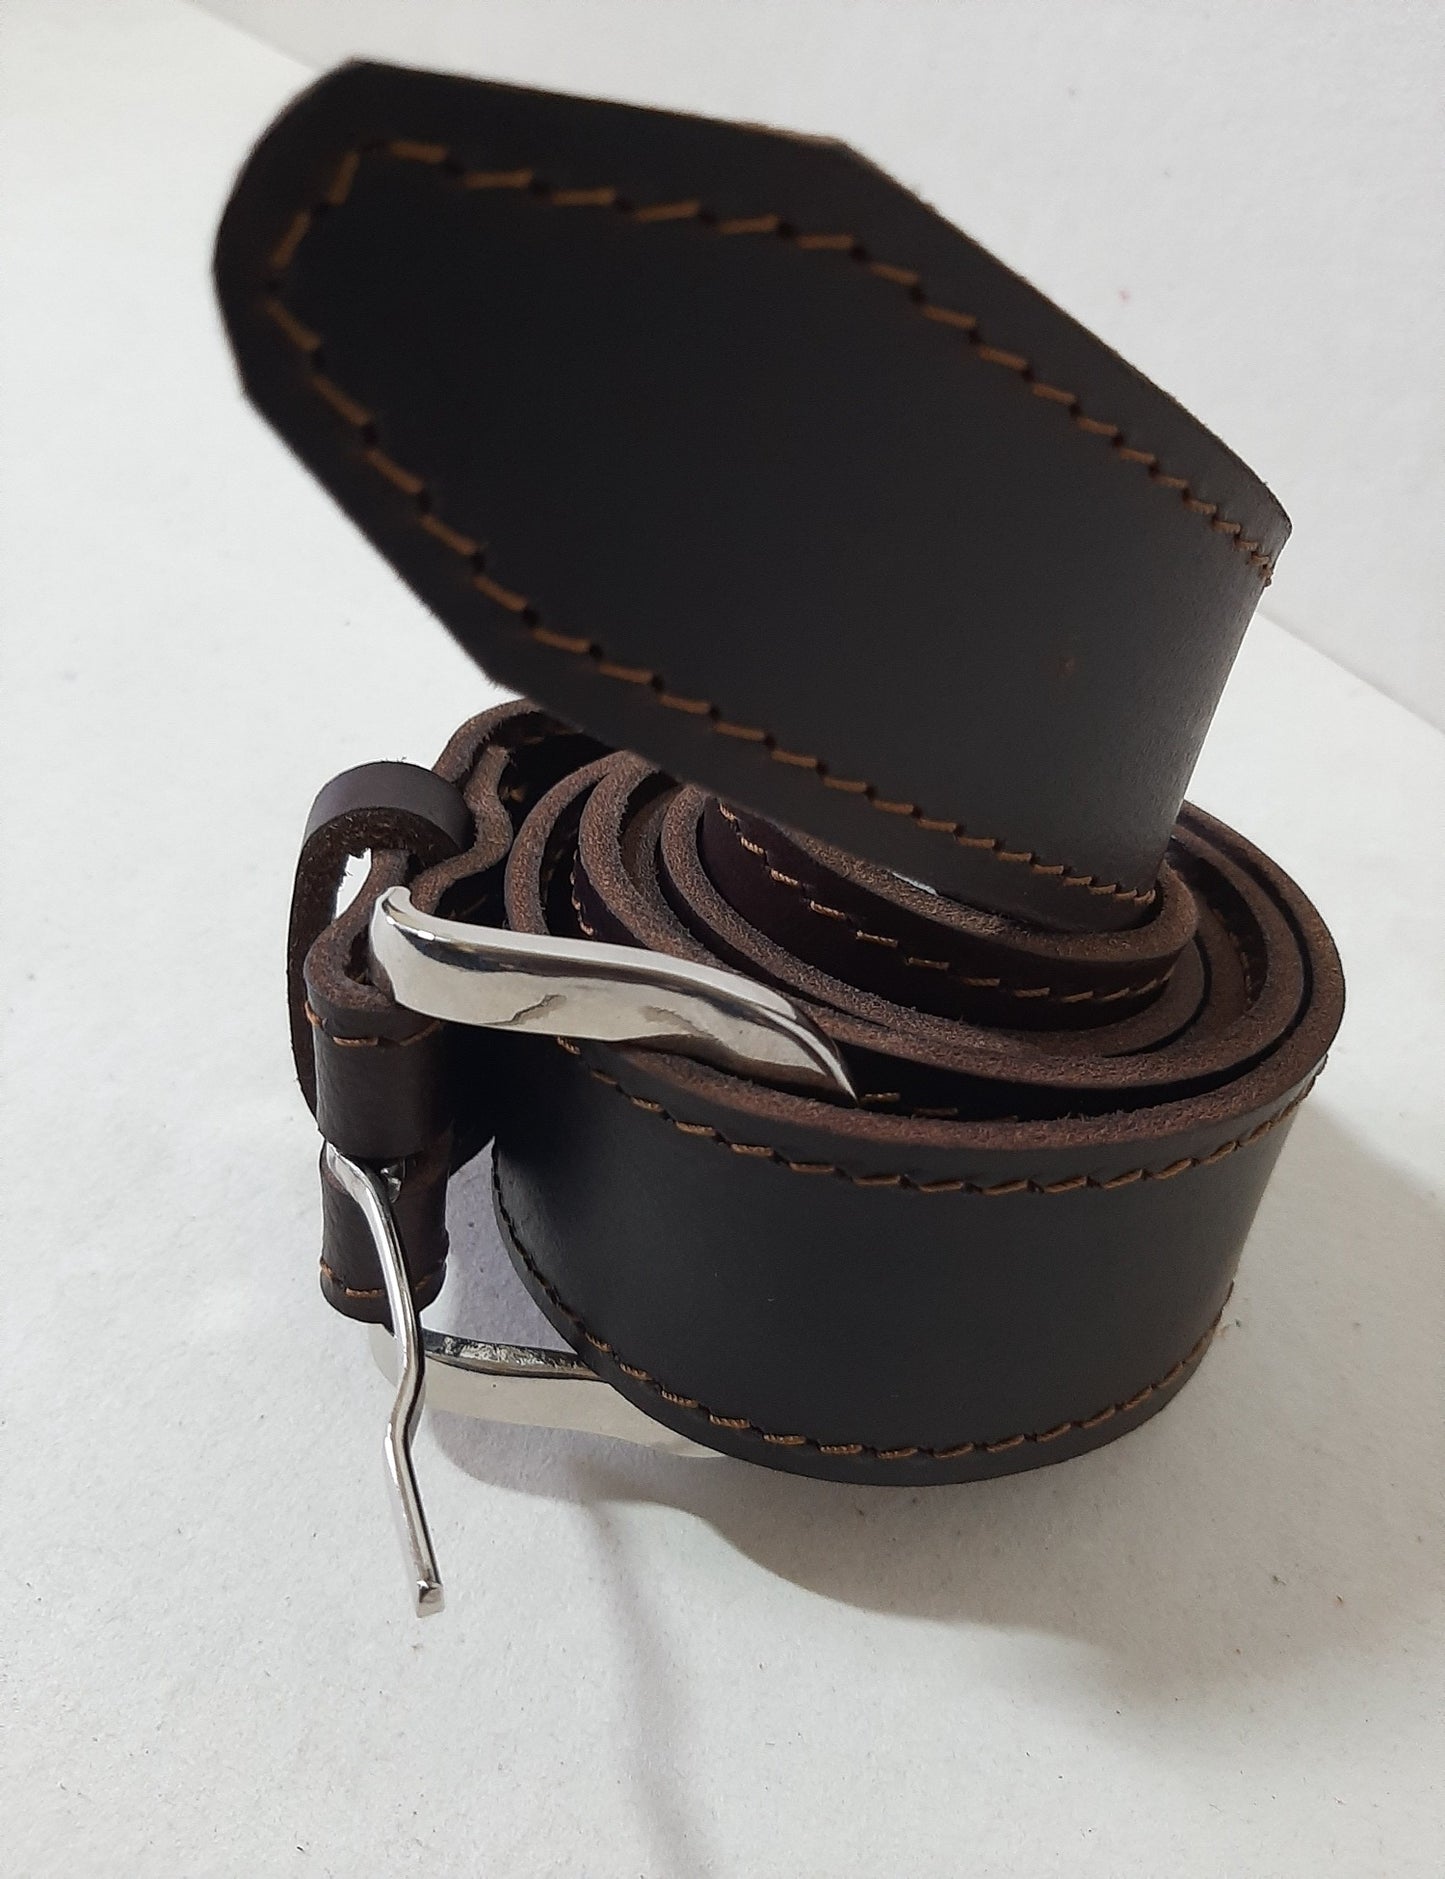 A dark brown Jean's genuine leather belts from cape Masai Leather